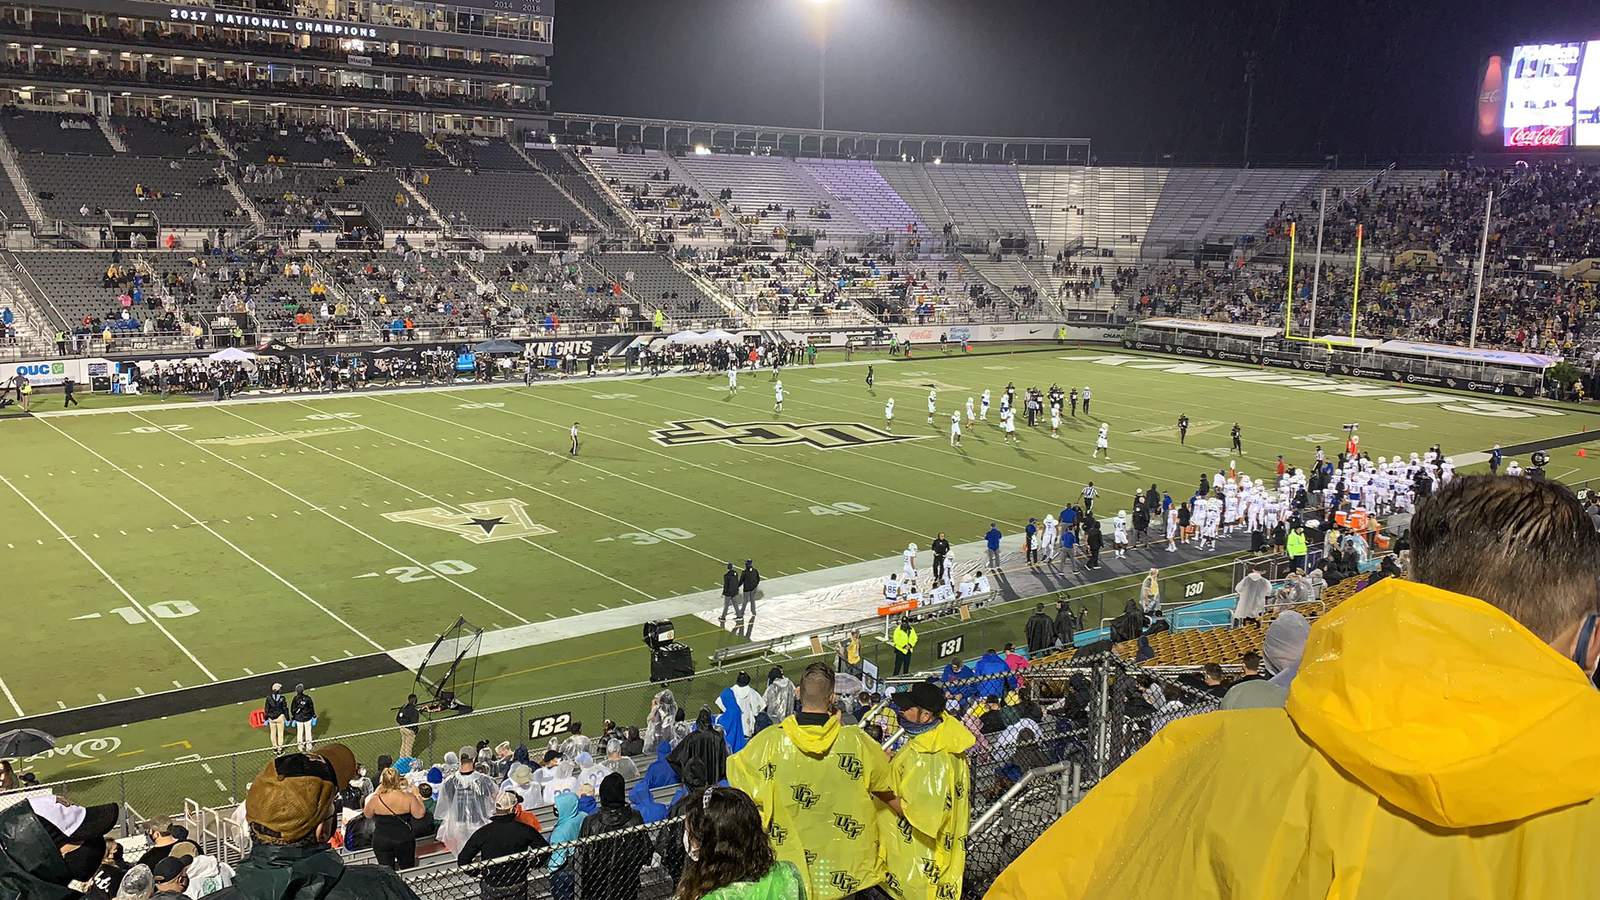 UCF Athletics’ financial game plan takes a $14.7 million hit due to COVID-19